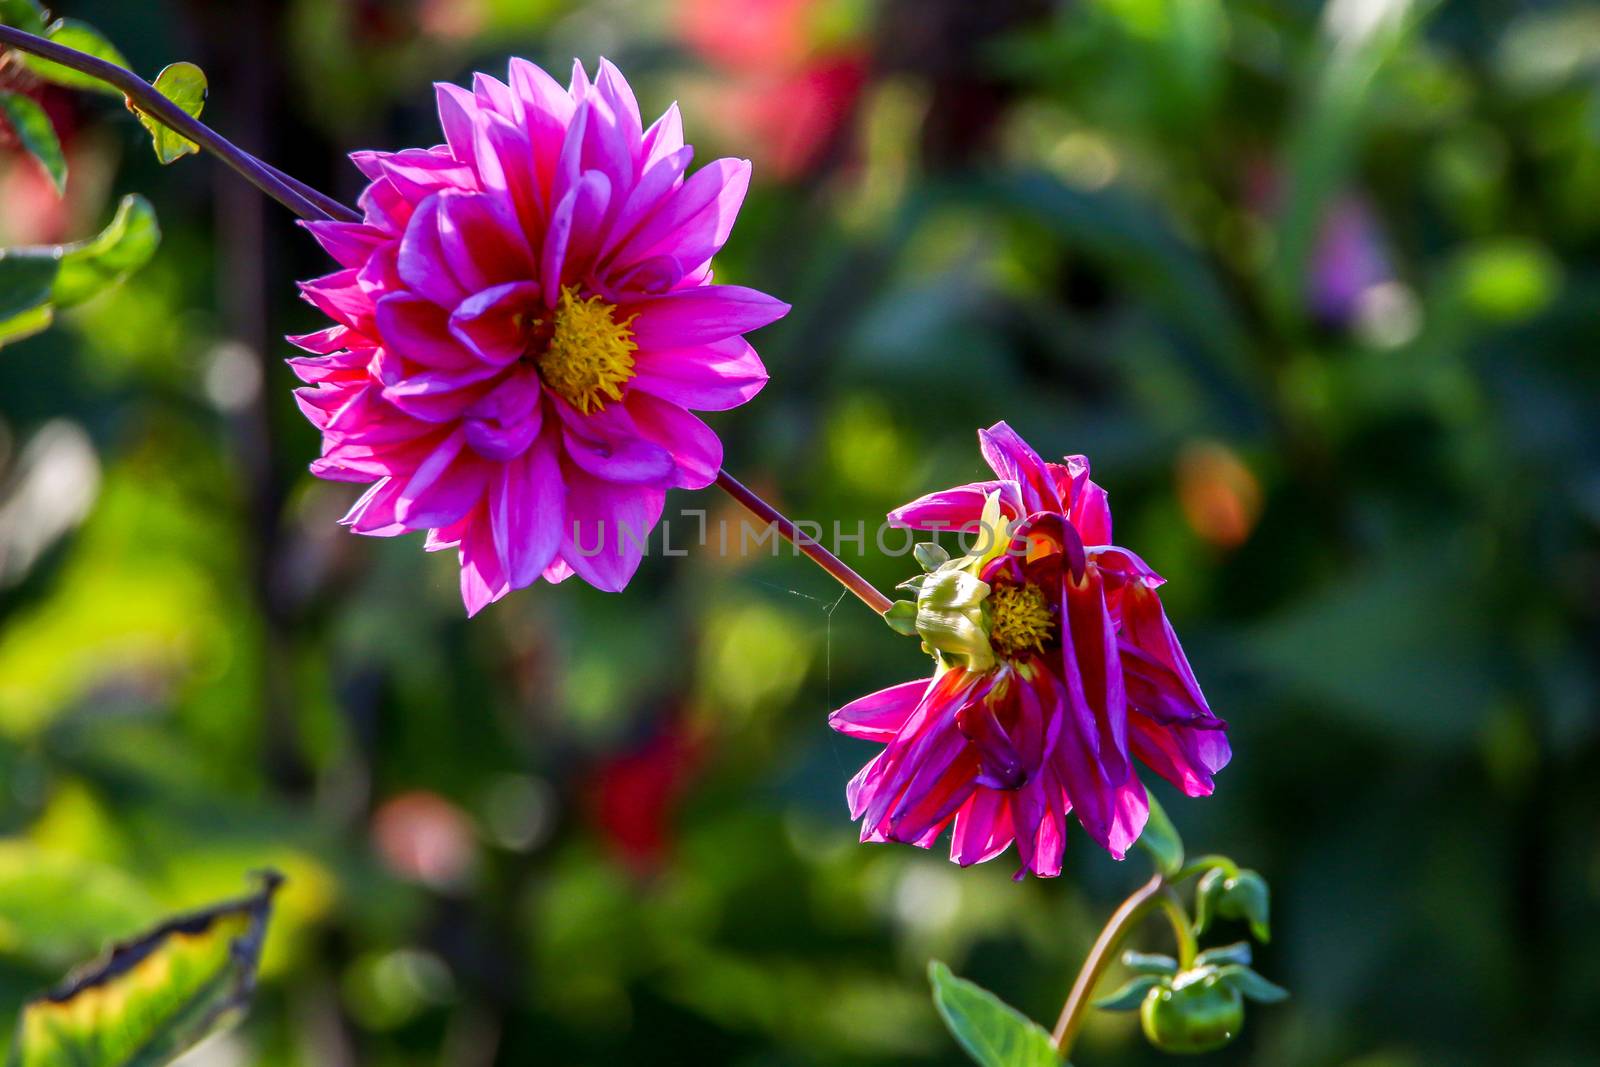 Background with  pink dahlia in green meadow. Dahlia is mexican plant of the daisy family, which is cultivated for its brightly coloured single or double flowers.

